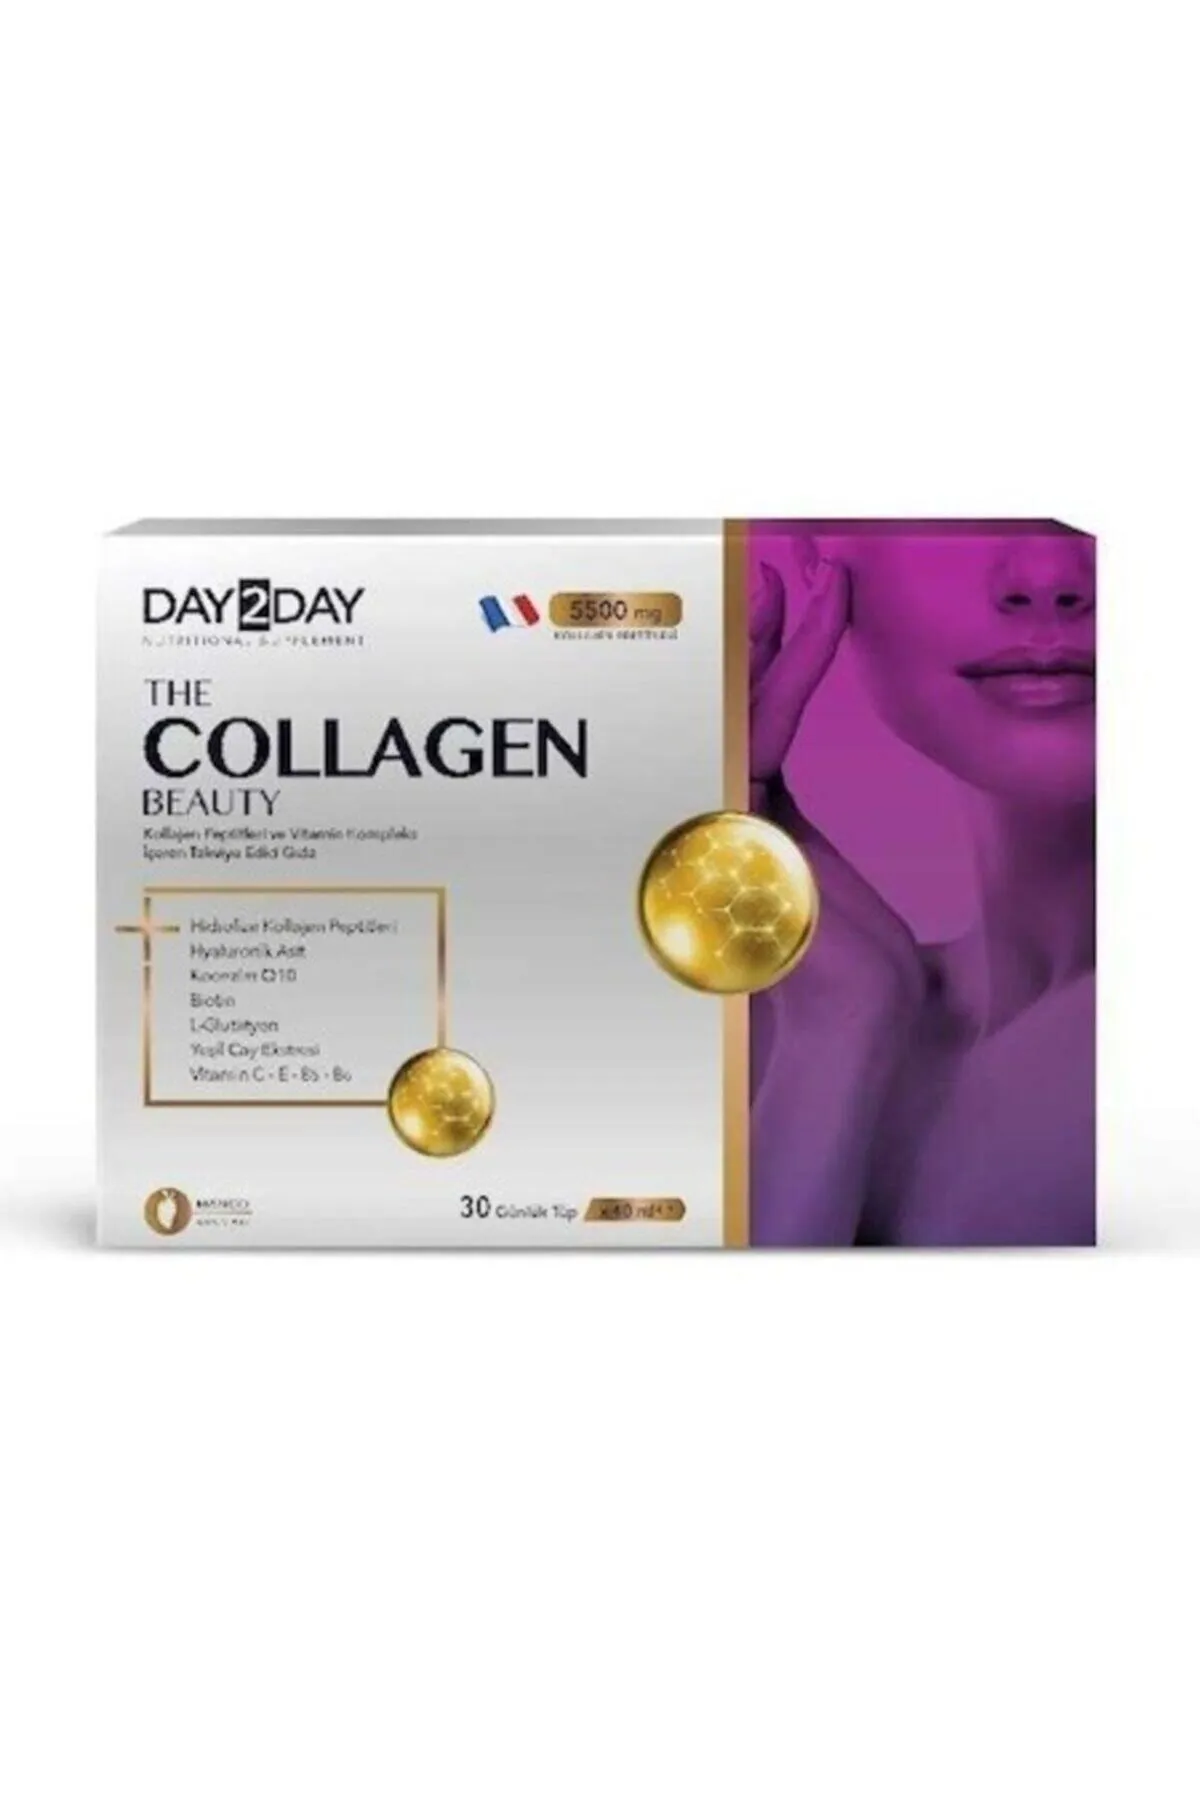 Day2Day The Collagen Beauty 30 x 40 ML Tüp - 1